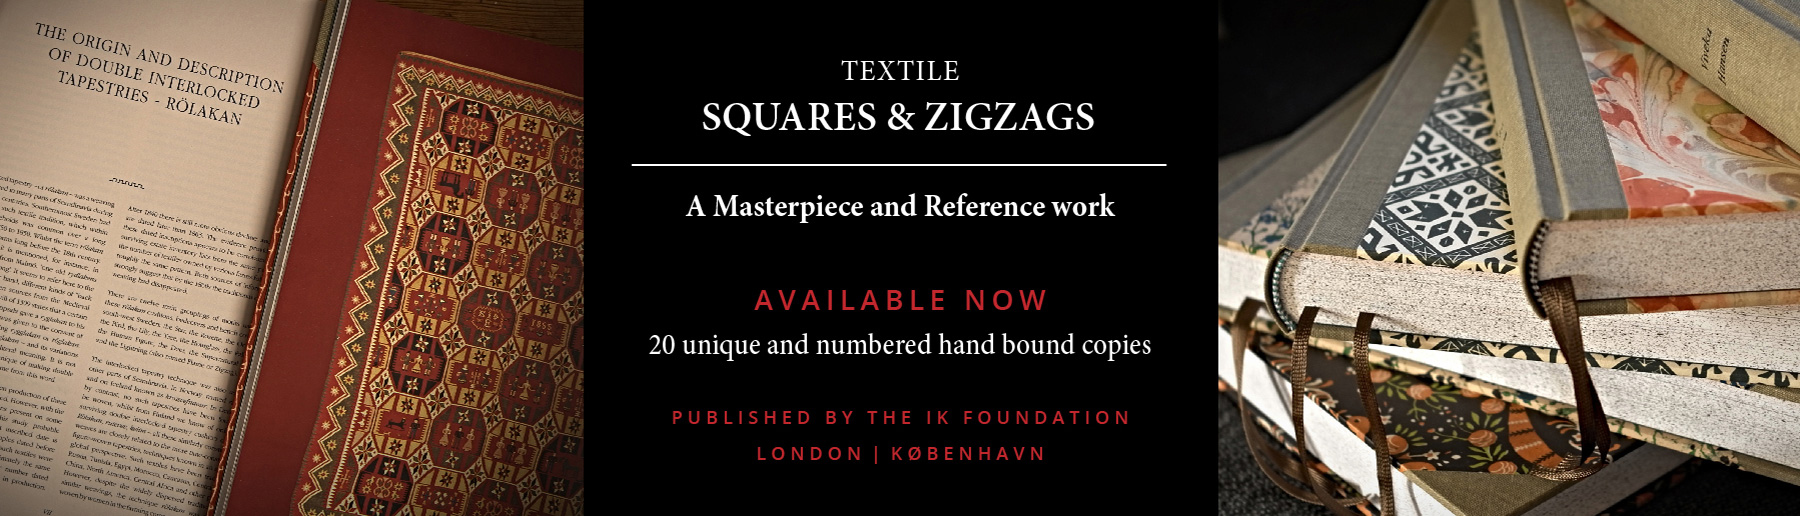 Textile Squares and Zigzags